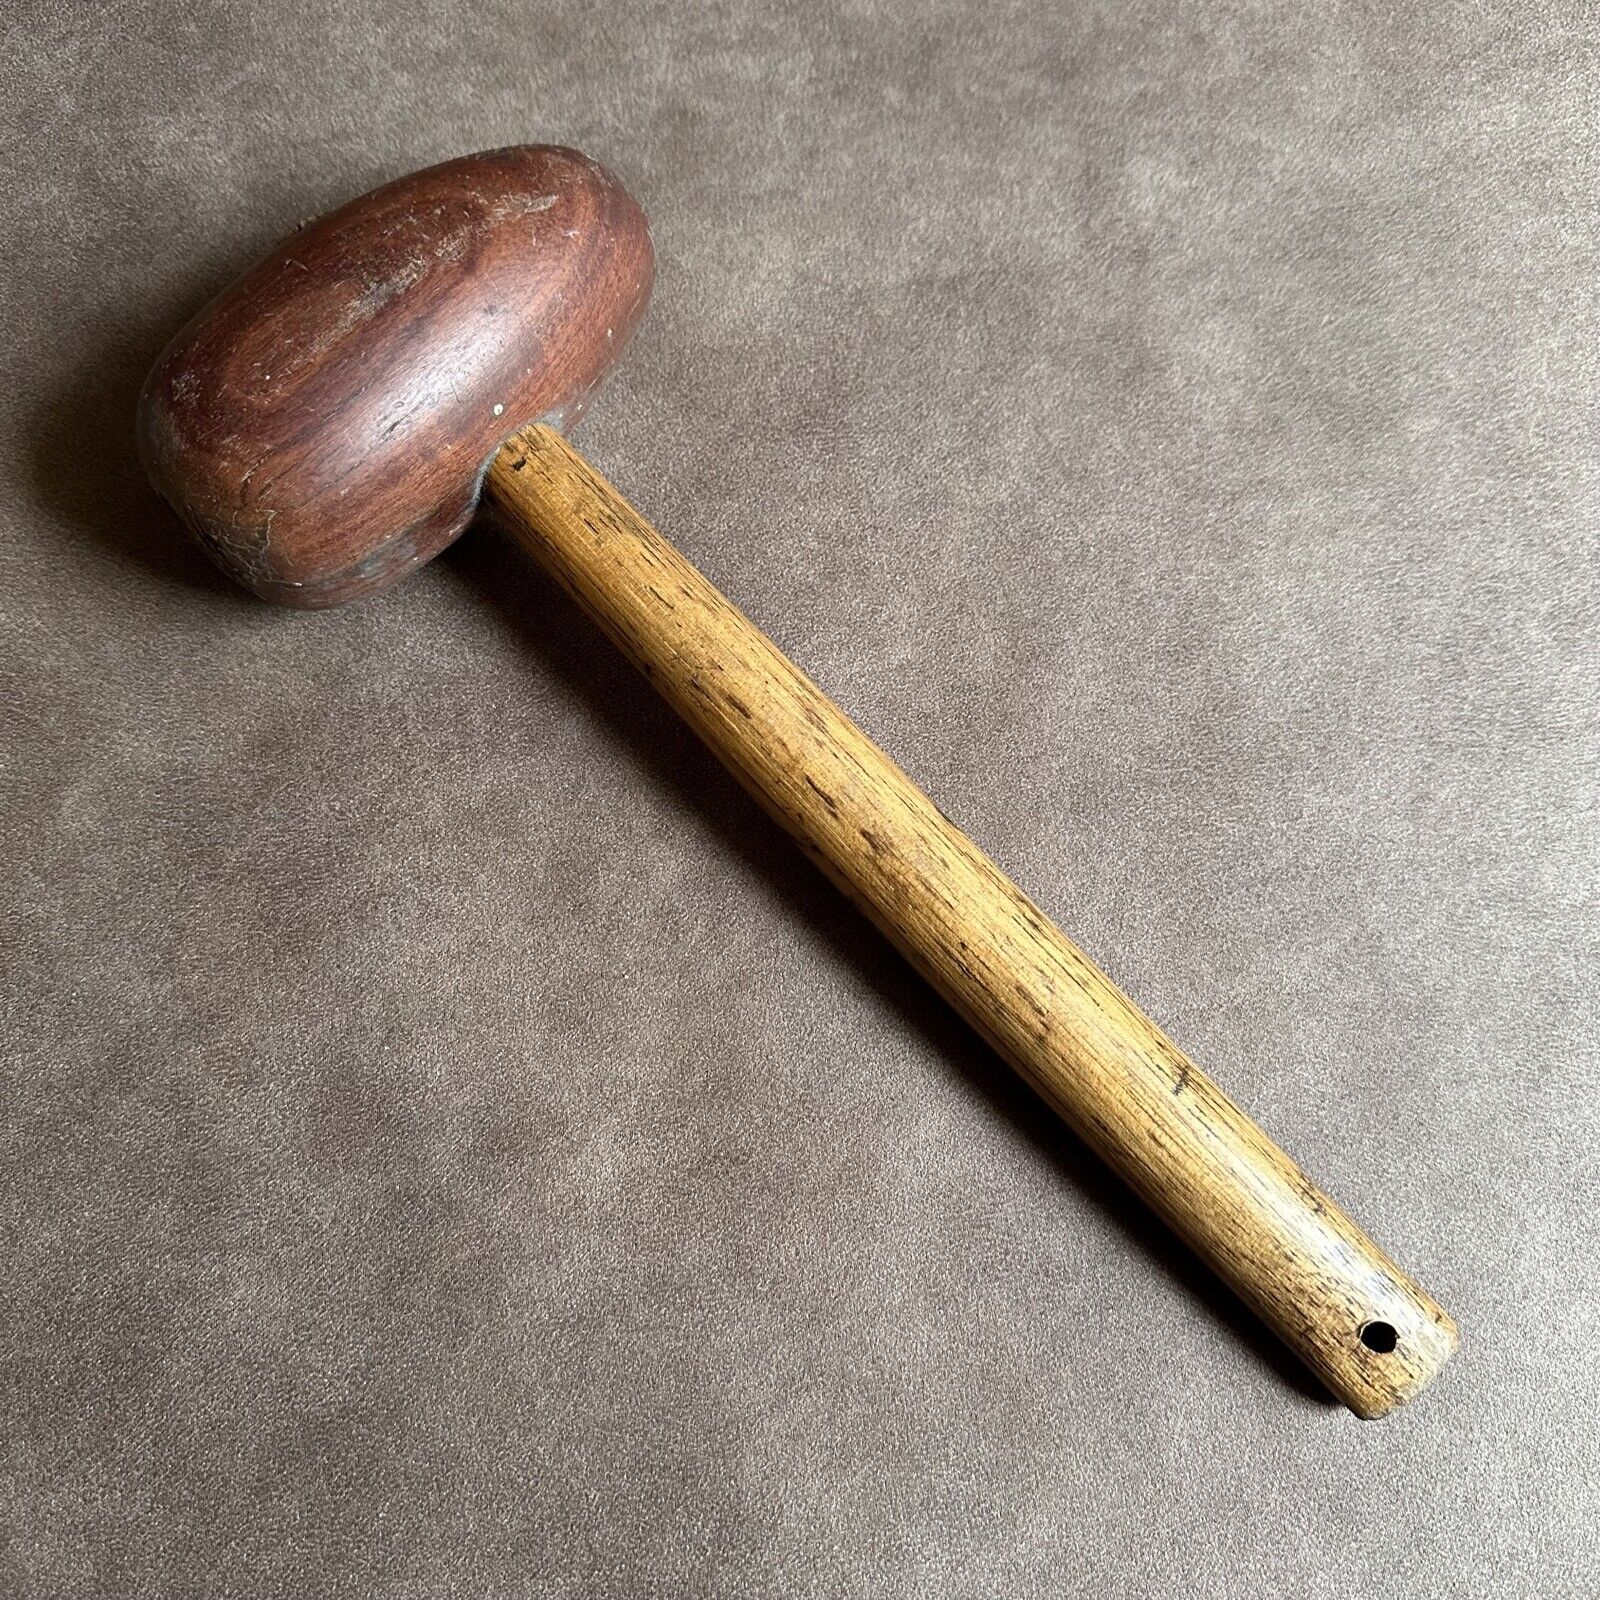 VINTAGE ANTIQUE WOODEN LEAD DRESSING BOSSING PLUMMER MALLET TINSMITH HAND TOOL